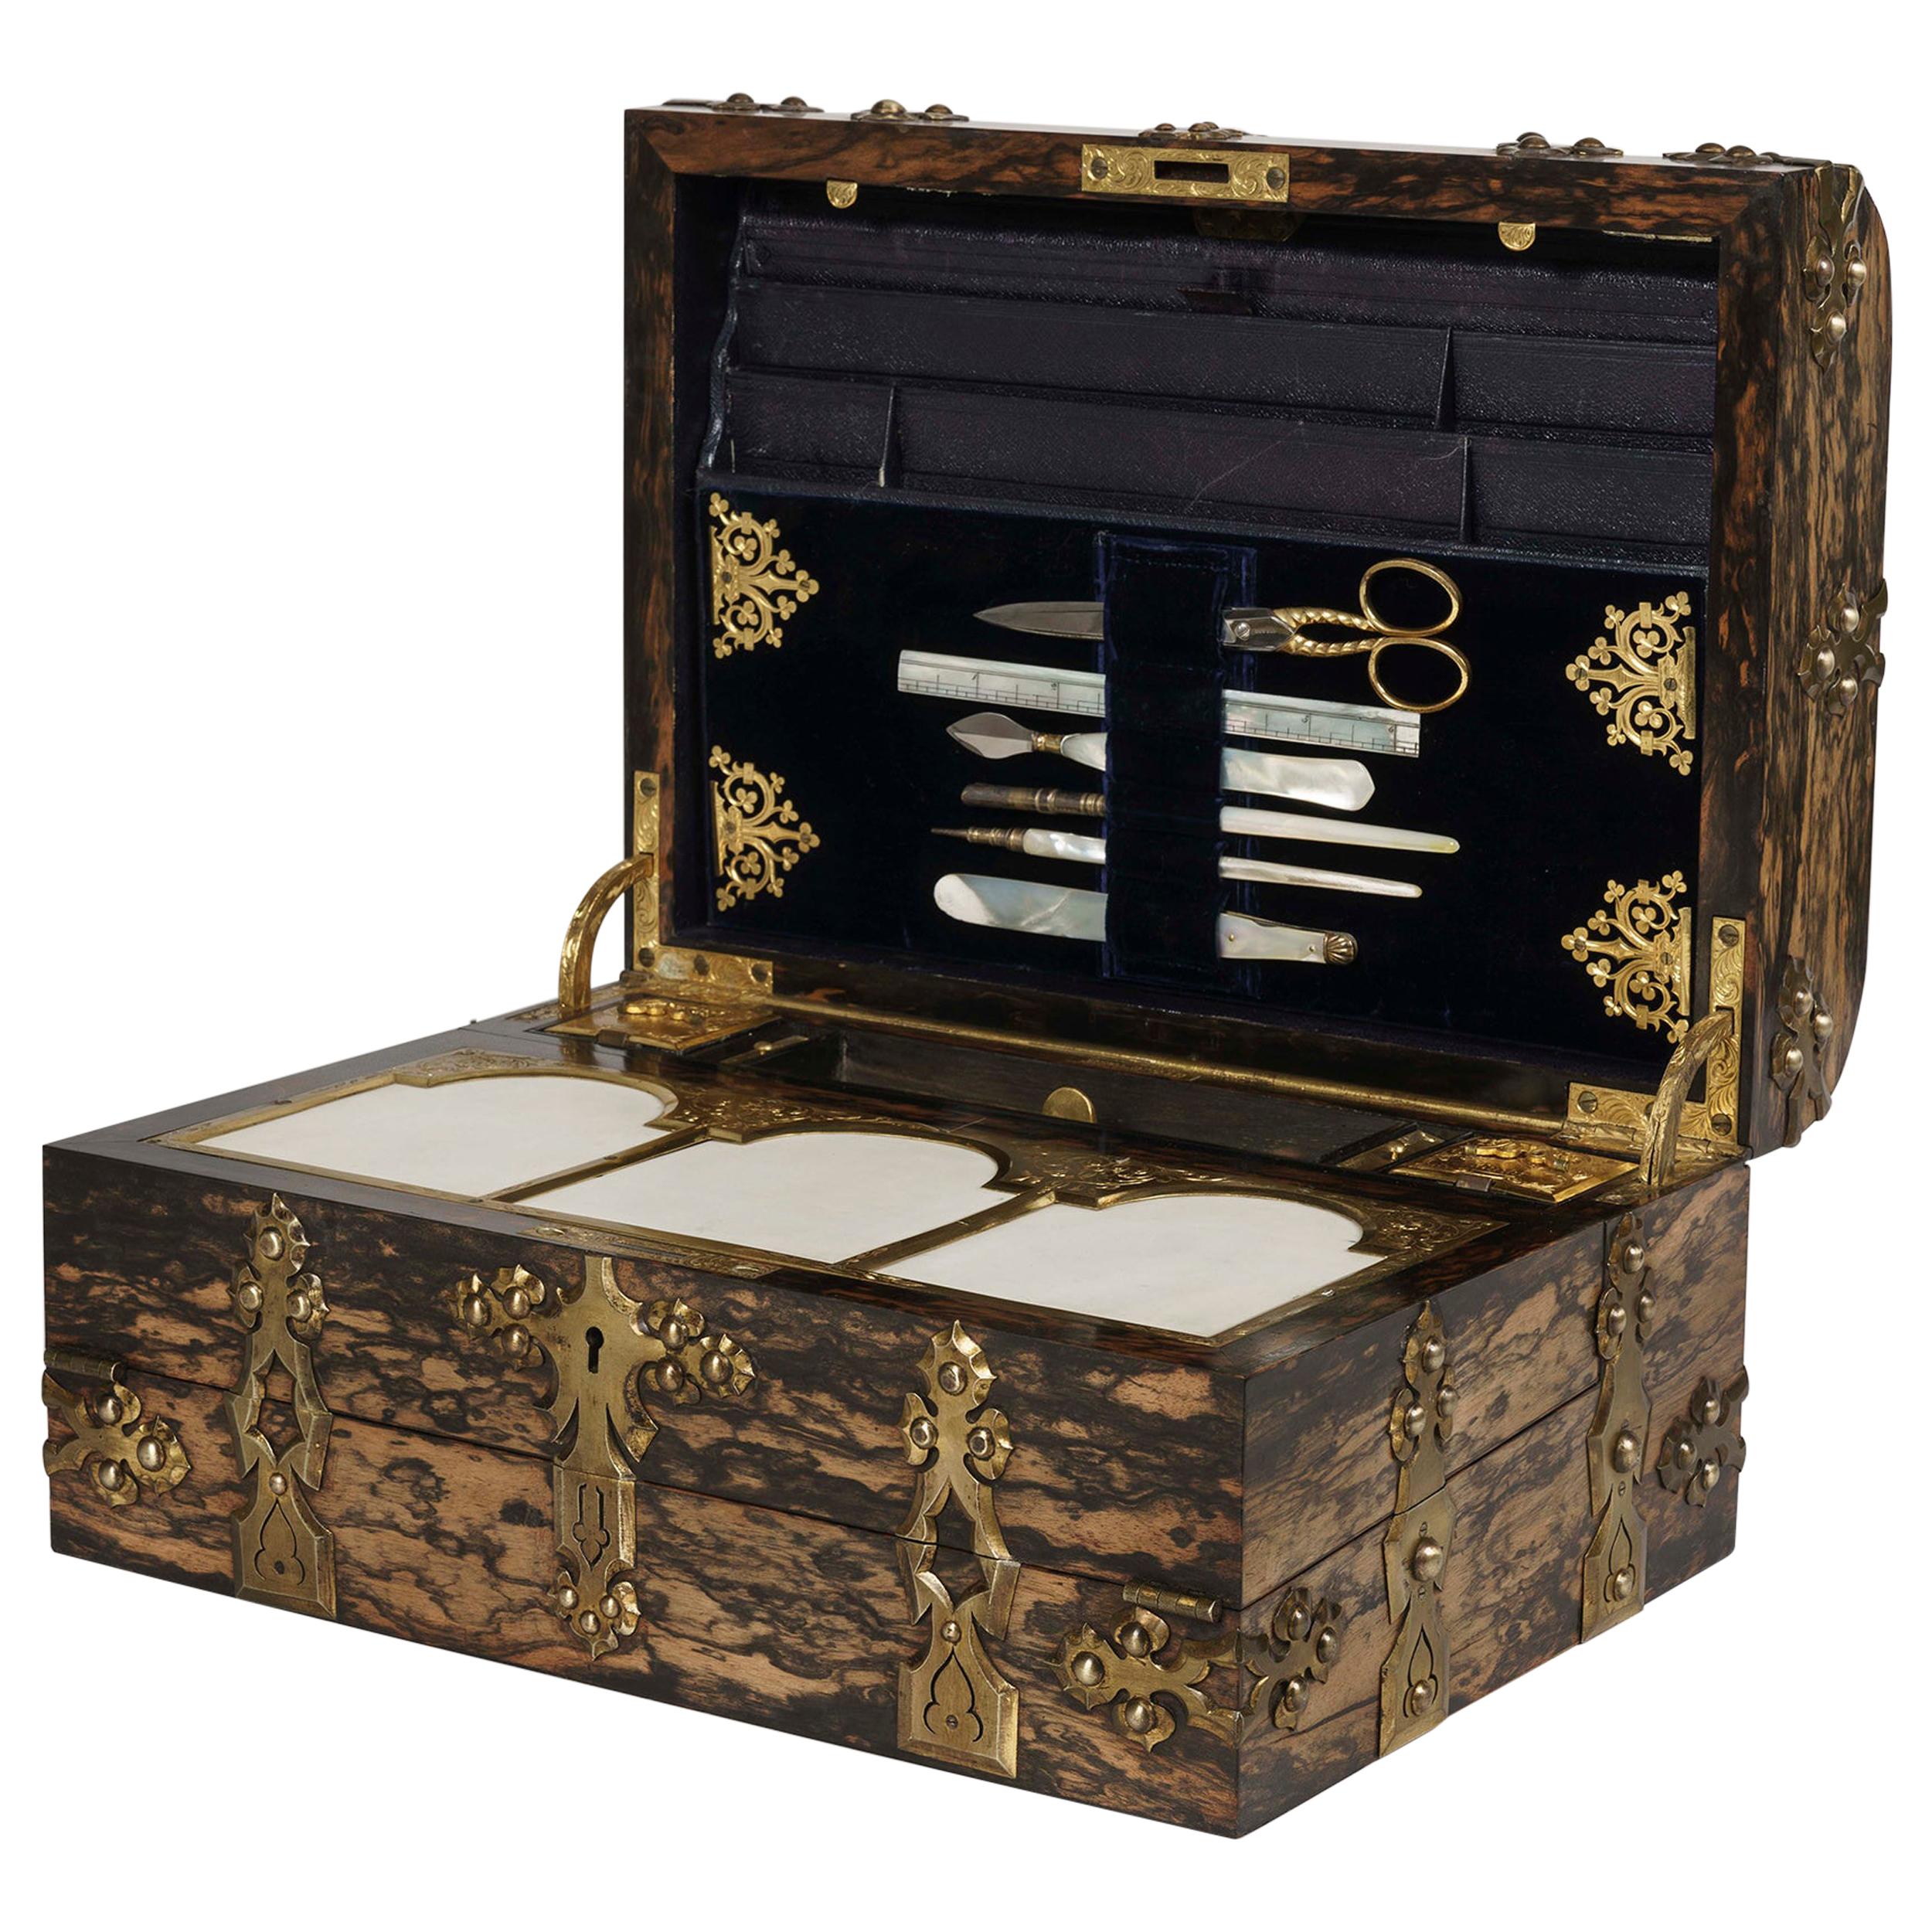 19th Century Coromandel Writing and Stationary Box by Howell, James & Co